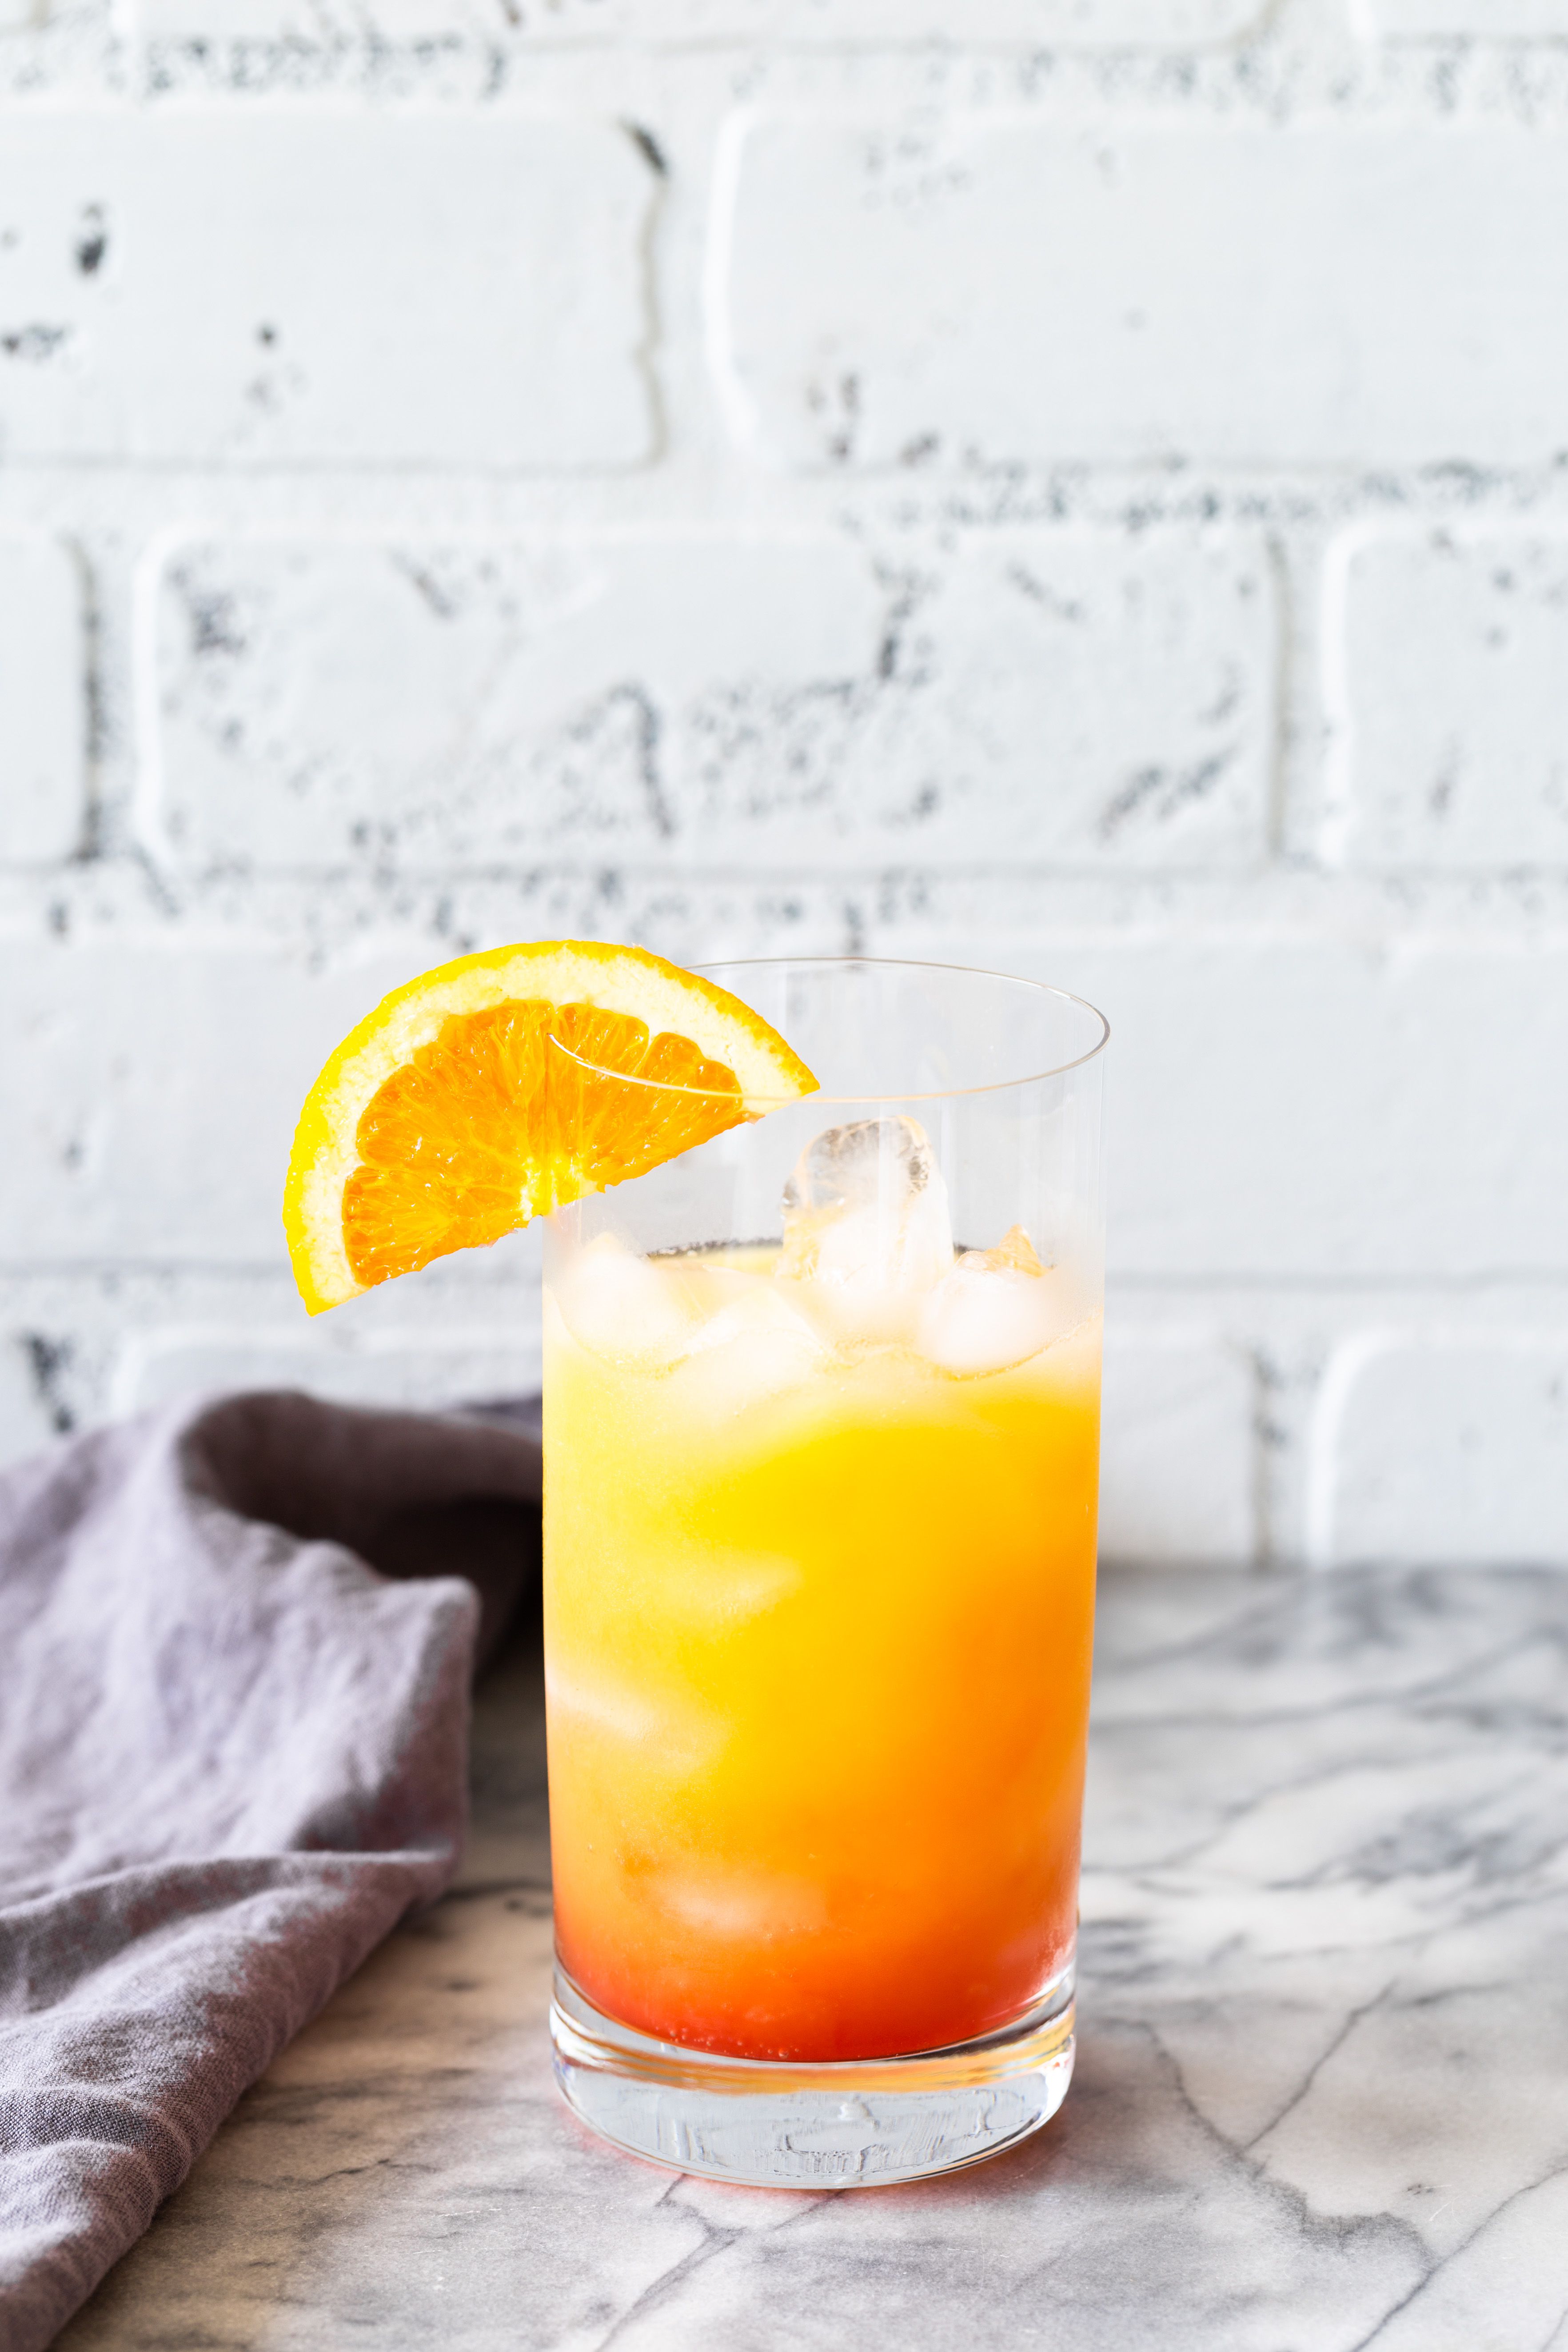 Sweet Sunrise Mocktail Recipe A Virgin Tequila Sunrise,Cooking Ribs On Grill